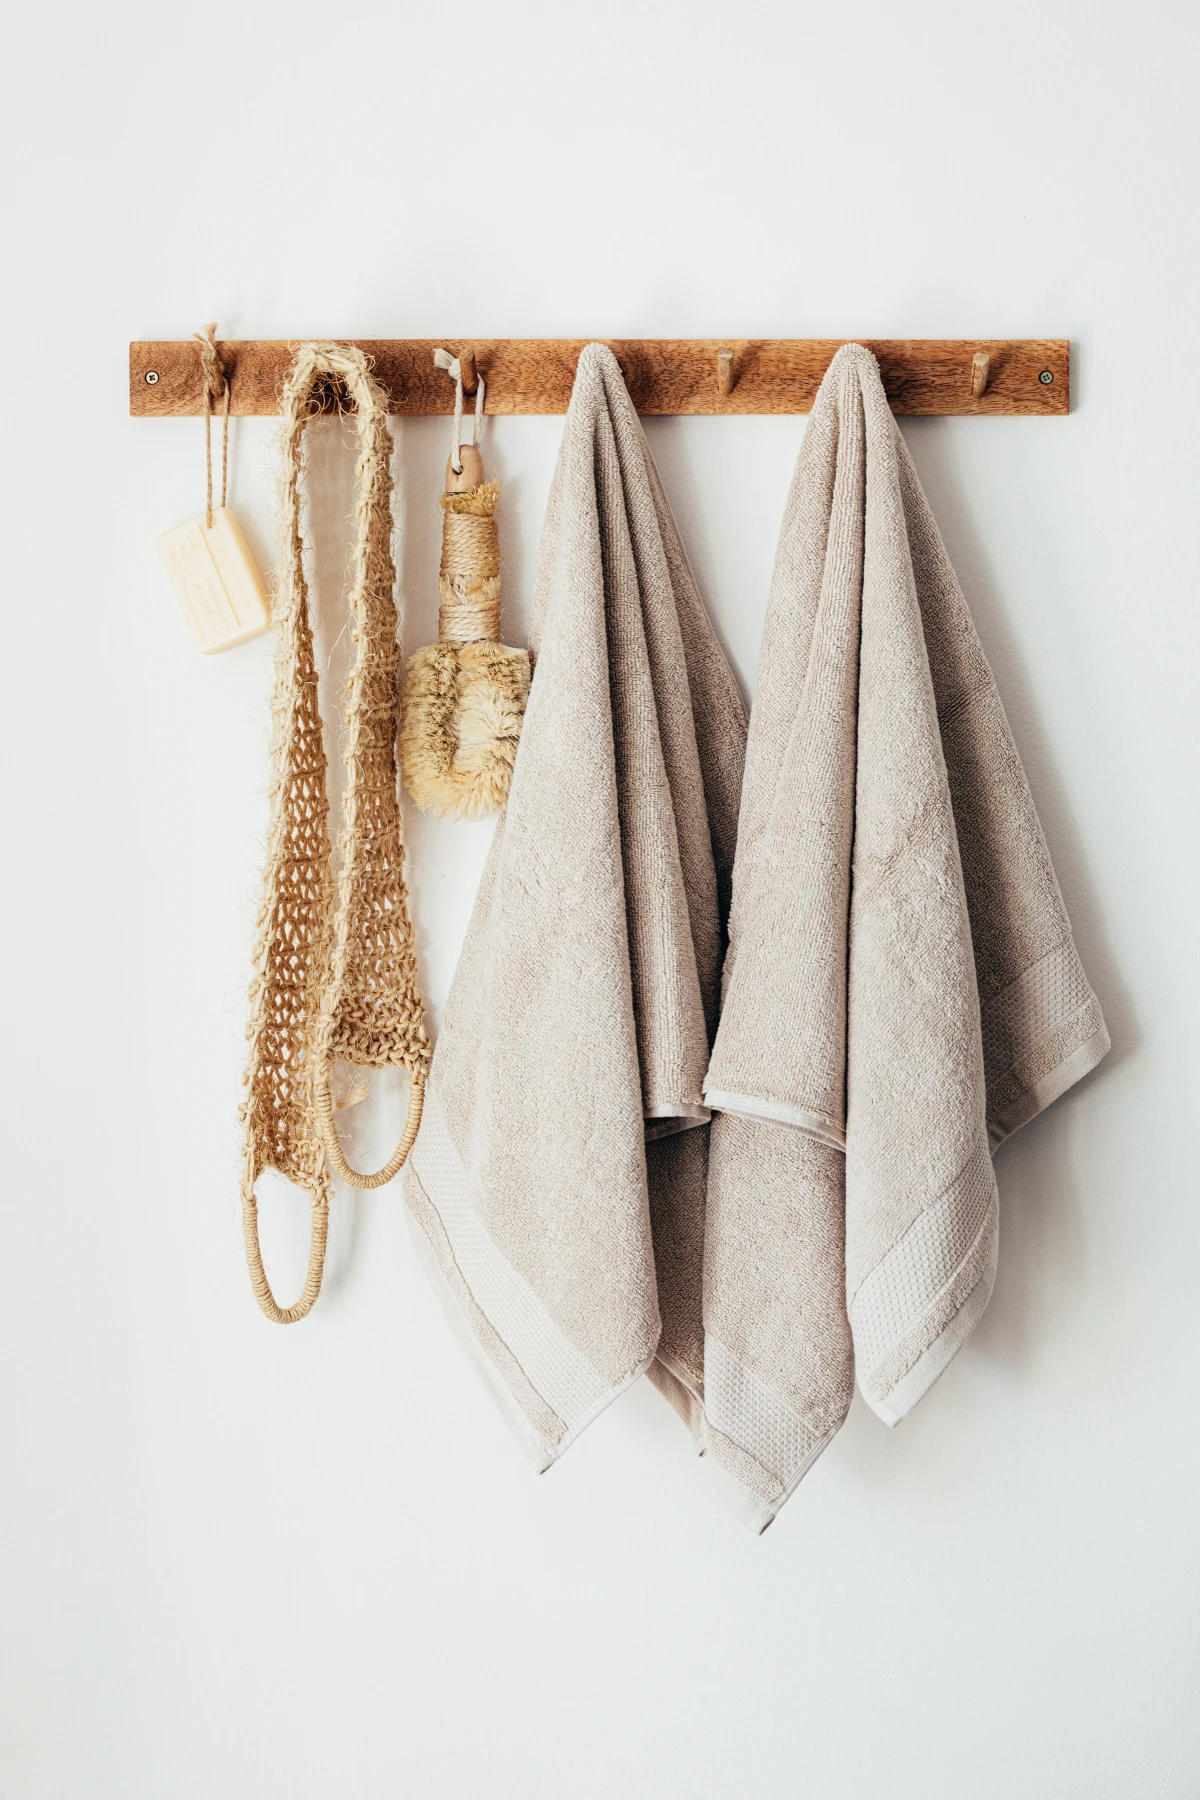 how to reuse old bath towels bath towels hanging in bathroom